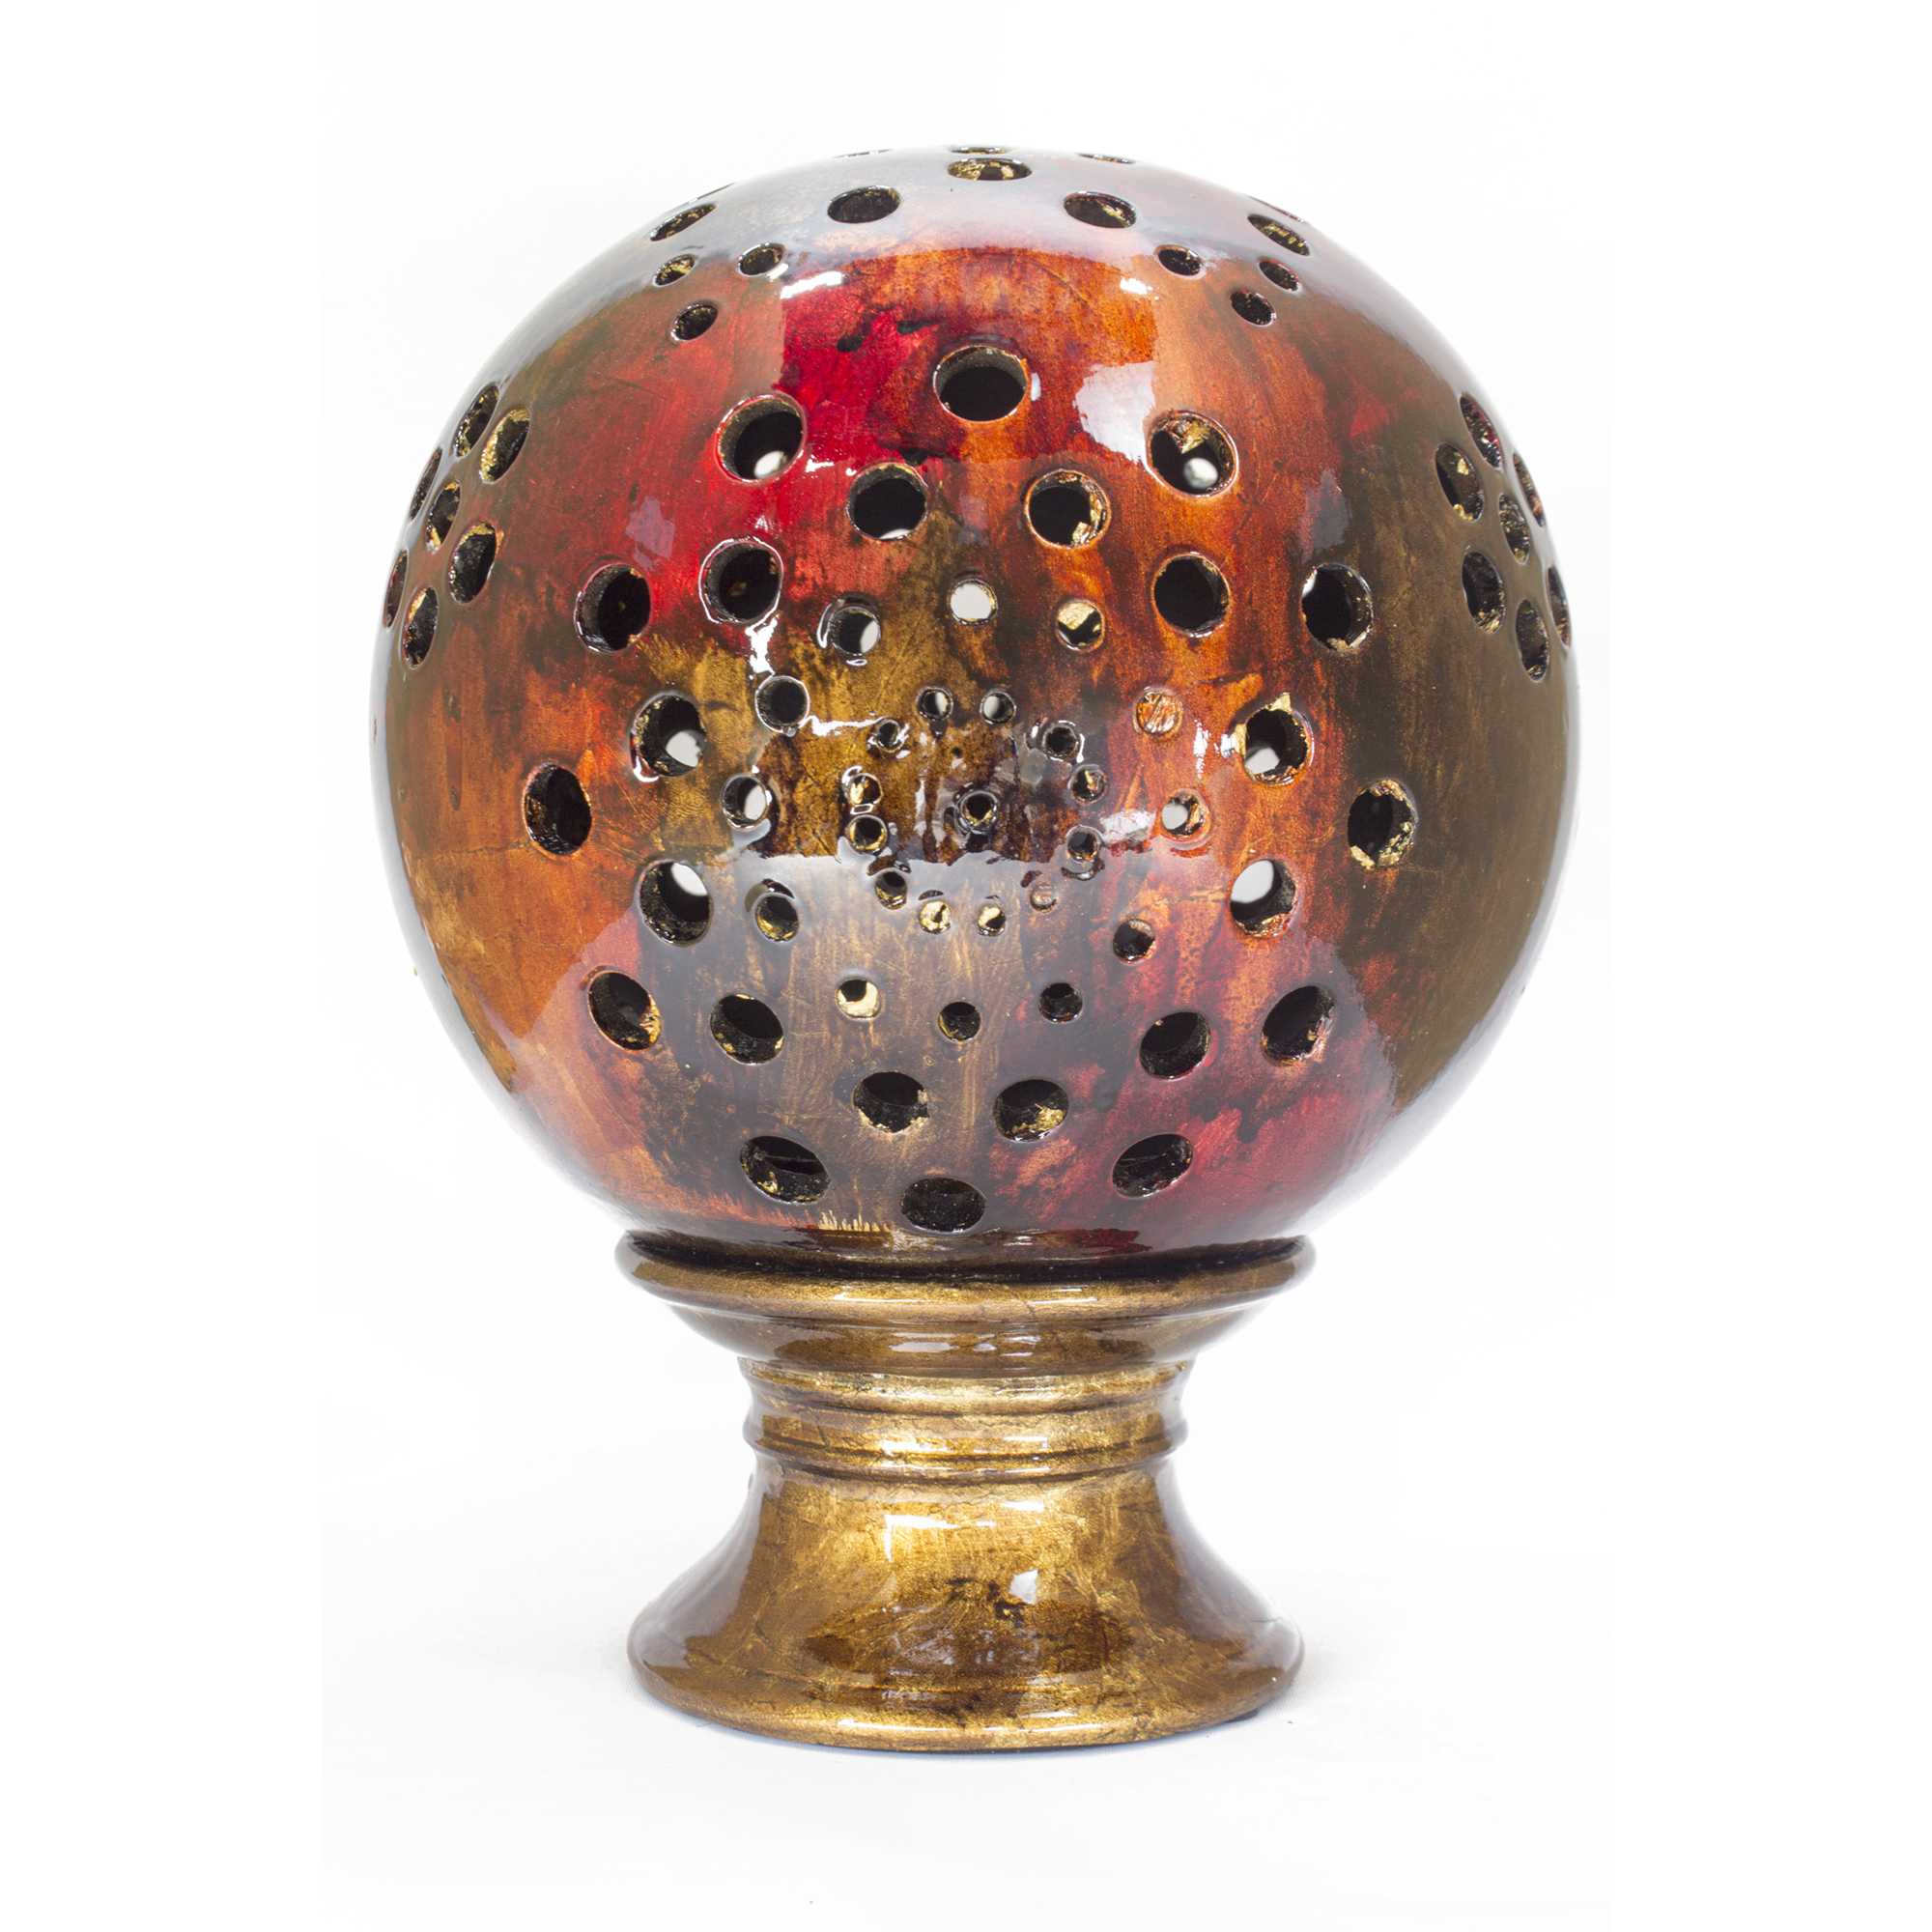 8.75" X 8.75" X 12" Copper Red Gold Ceramic Foiled and Lacquered Globe Candleholder